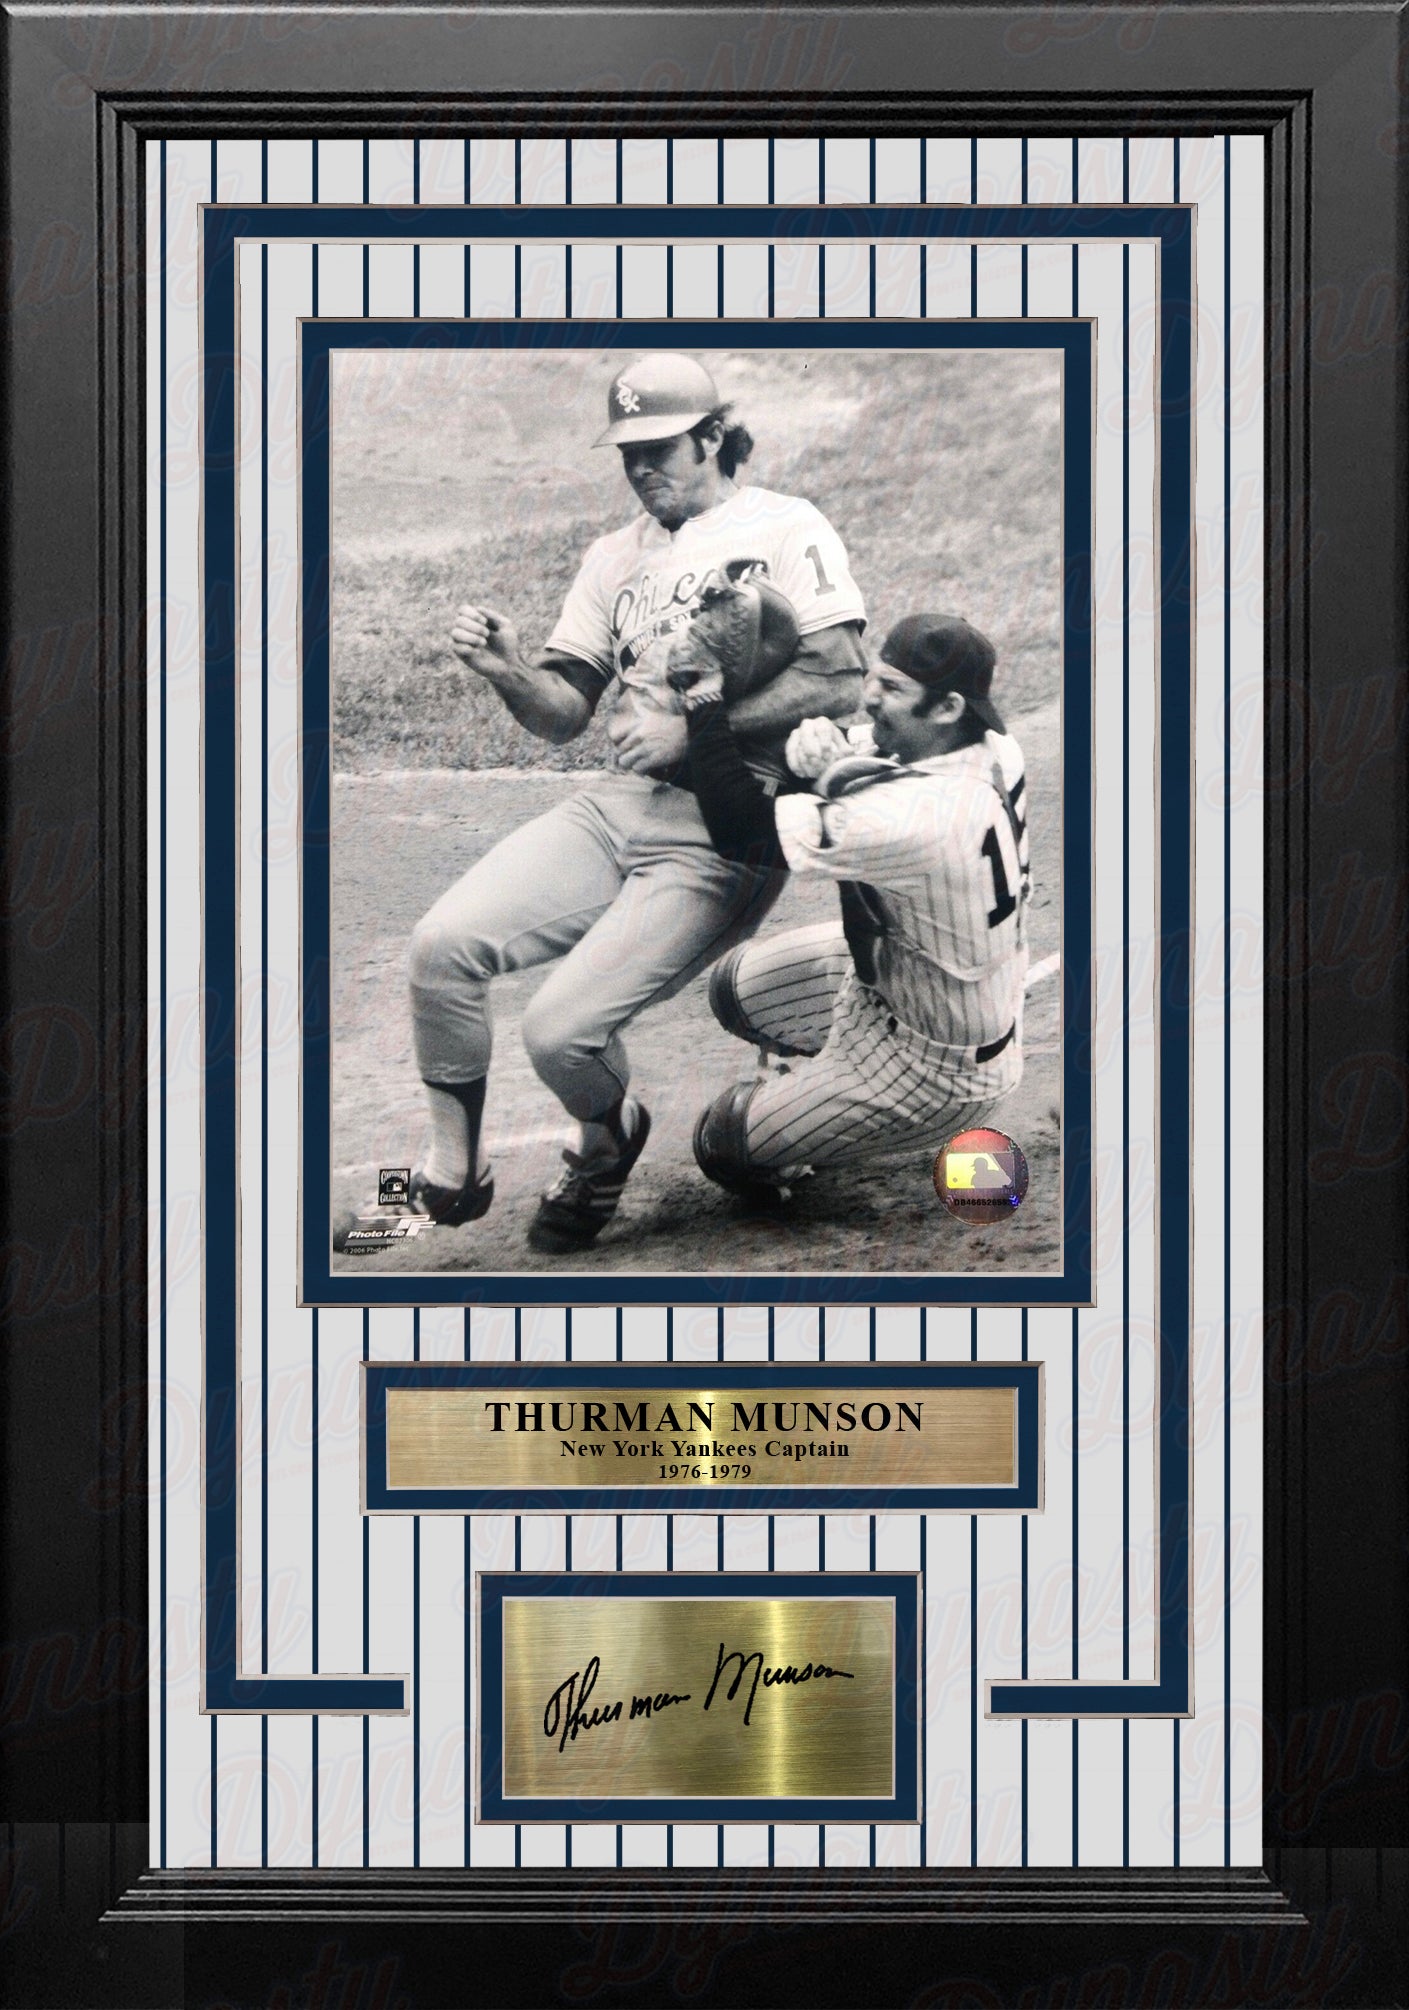 Thurman Munson Home Plate Collision NY Yankees 8x10 Framed Baseball Photo with Engraved Autograph - Dynasty Sports & Framing 